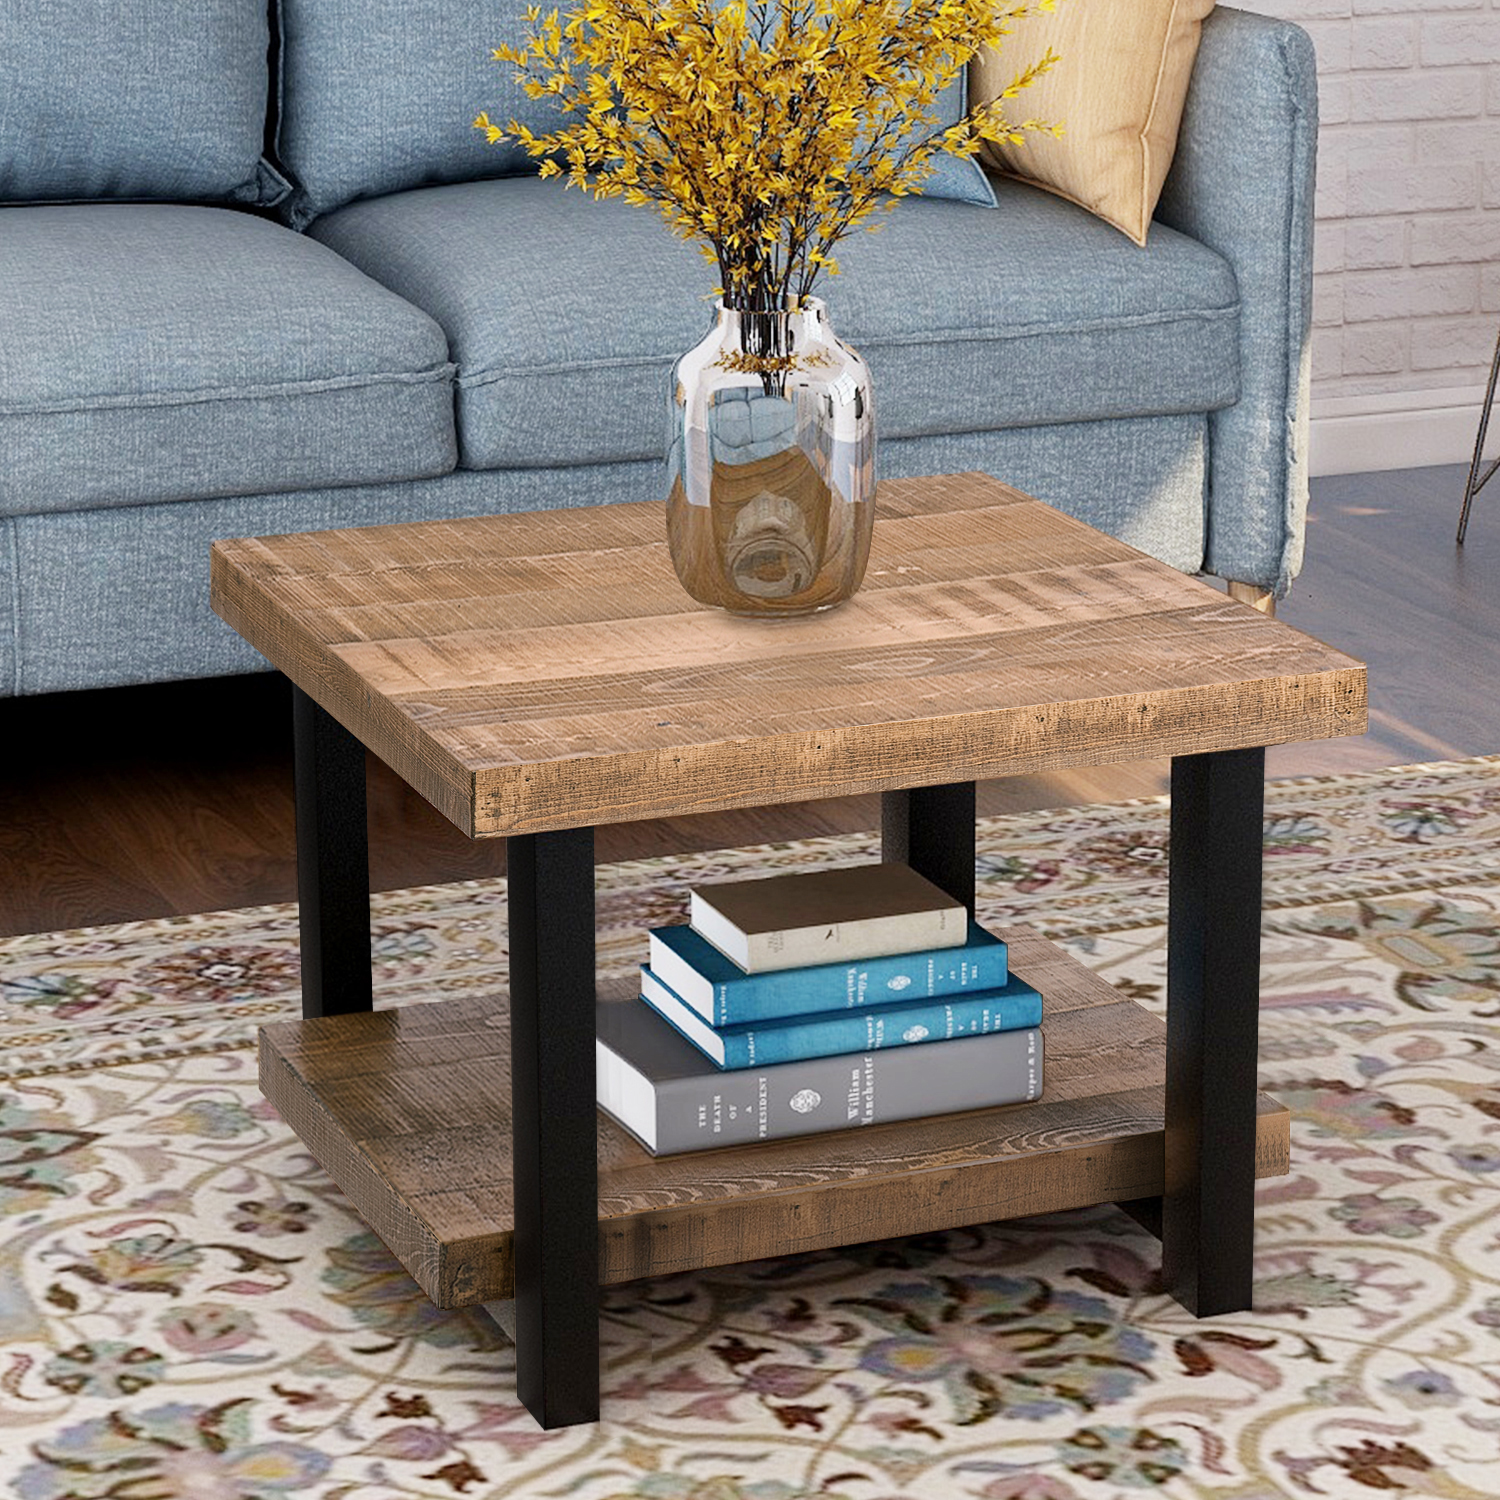 22"x22" Rustic Natural Coffee Table With Storage Shelf